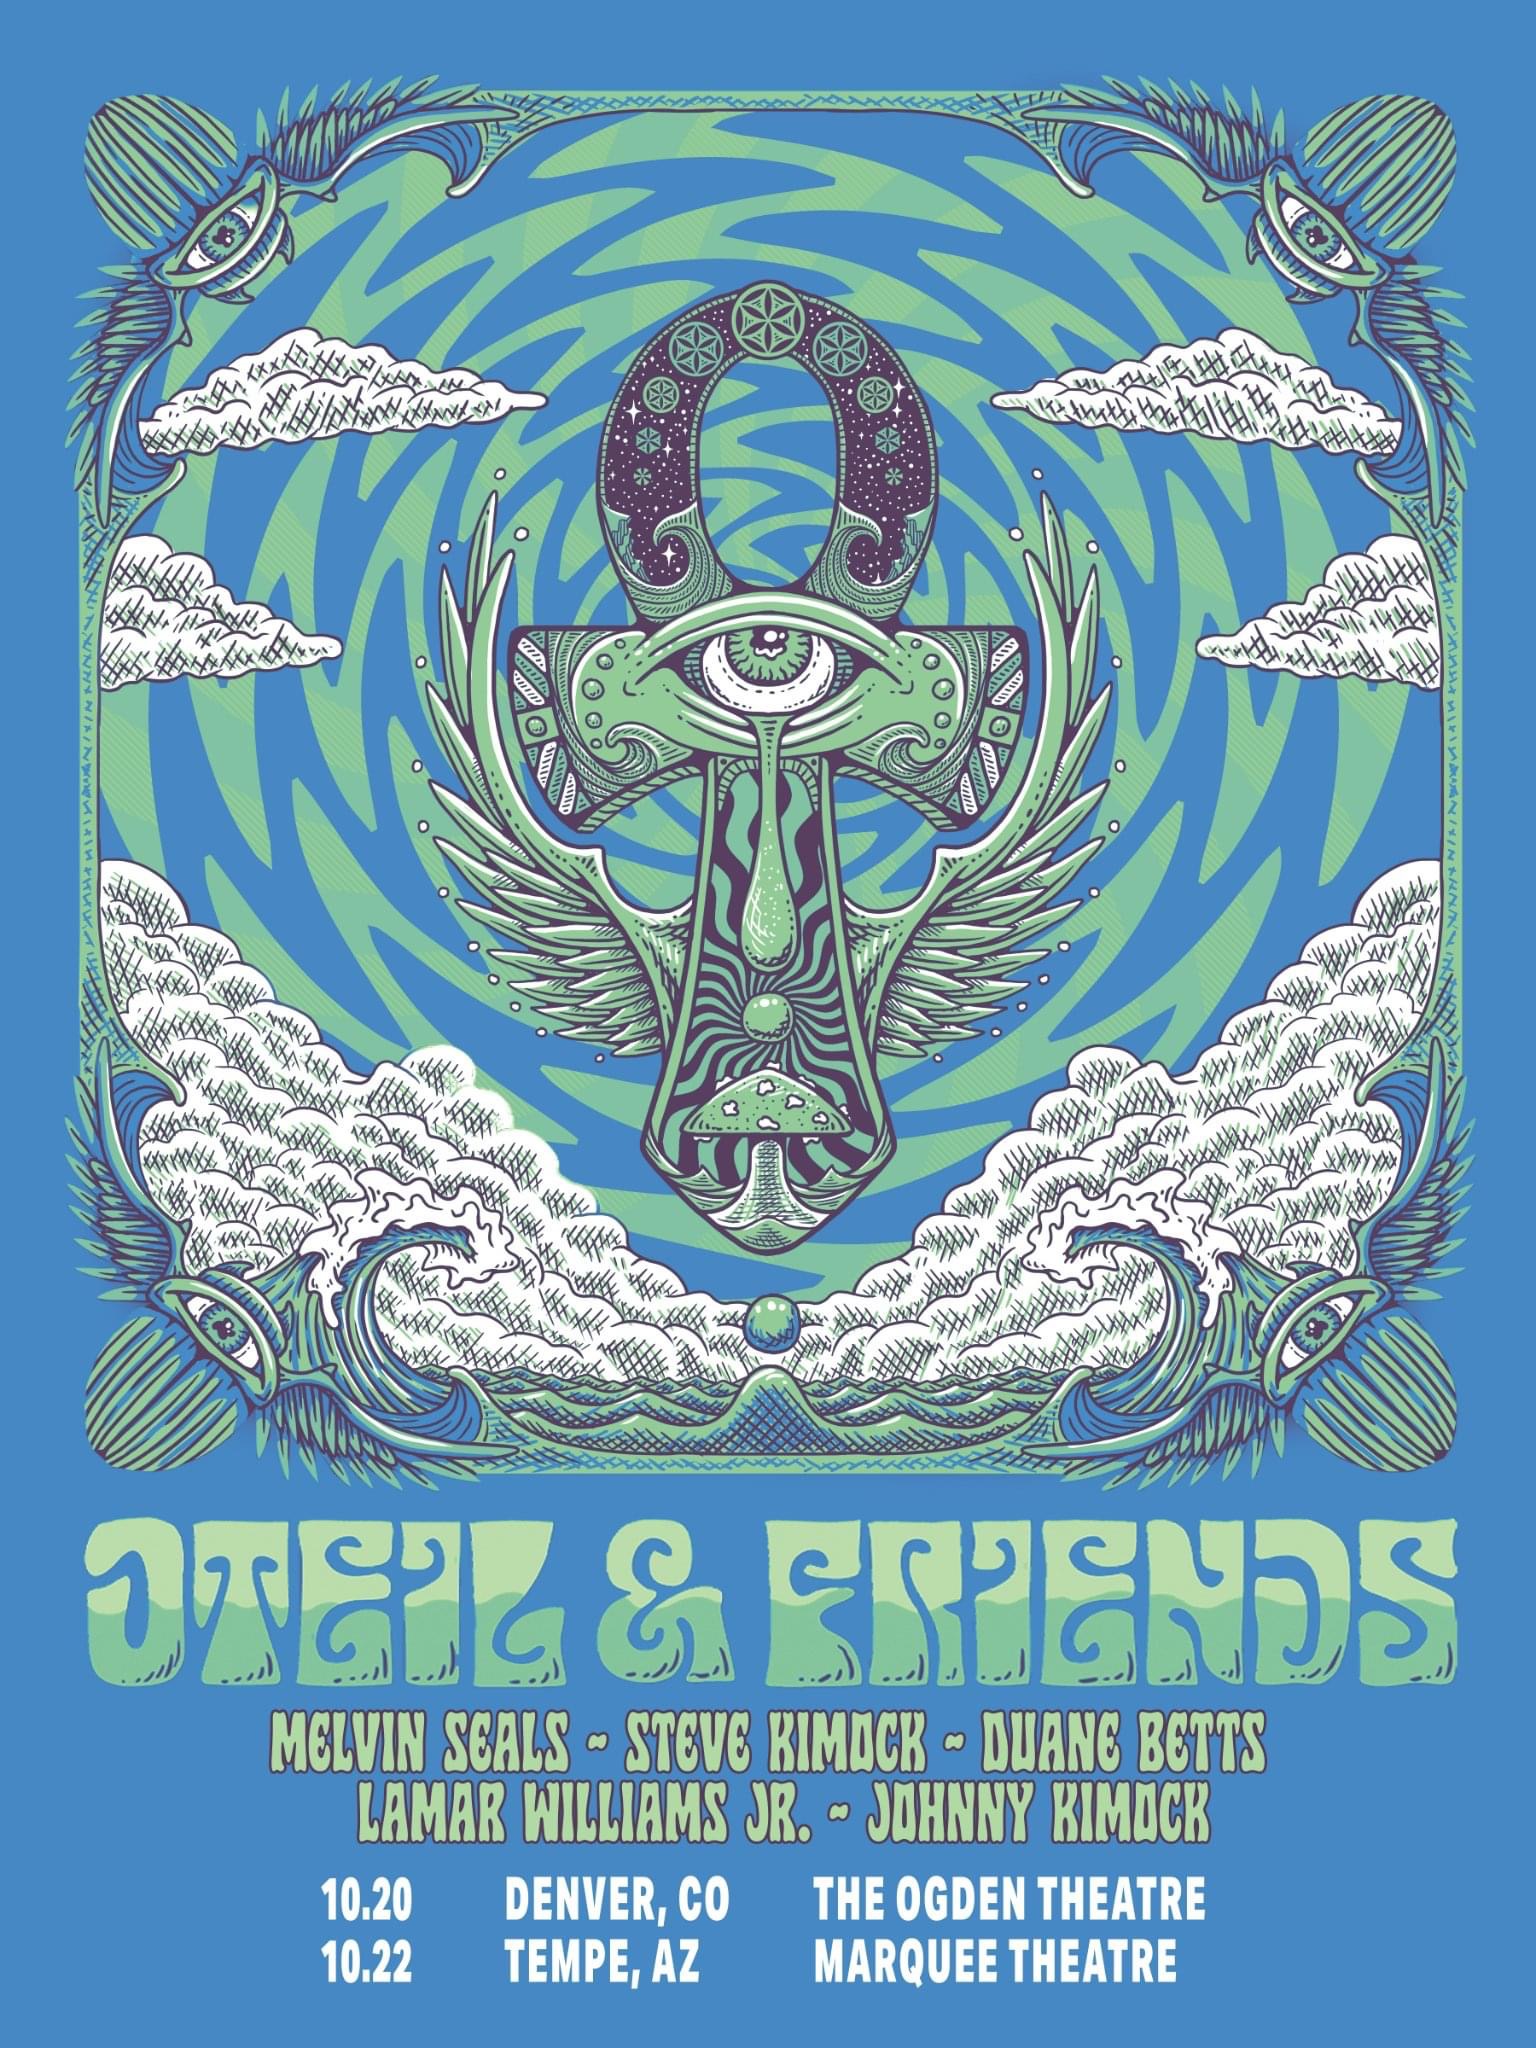 Denver and Tempe! Oteil & Friends is headed your way in October.